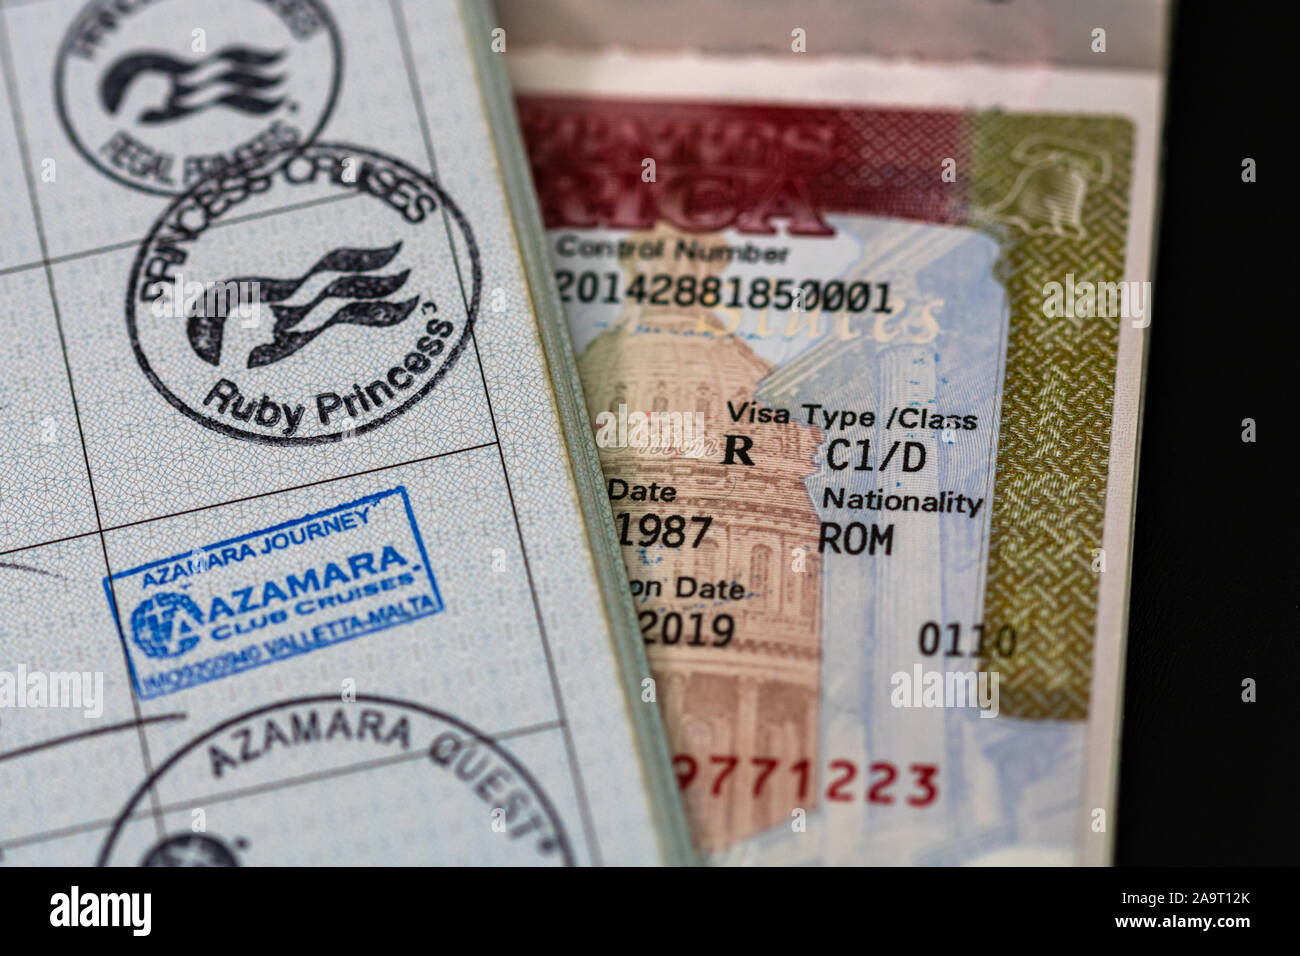 Seaman's discharge book and passport with C1/D US visa on black background  Stock Photo - Alamy